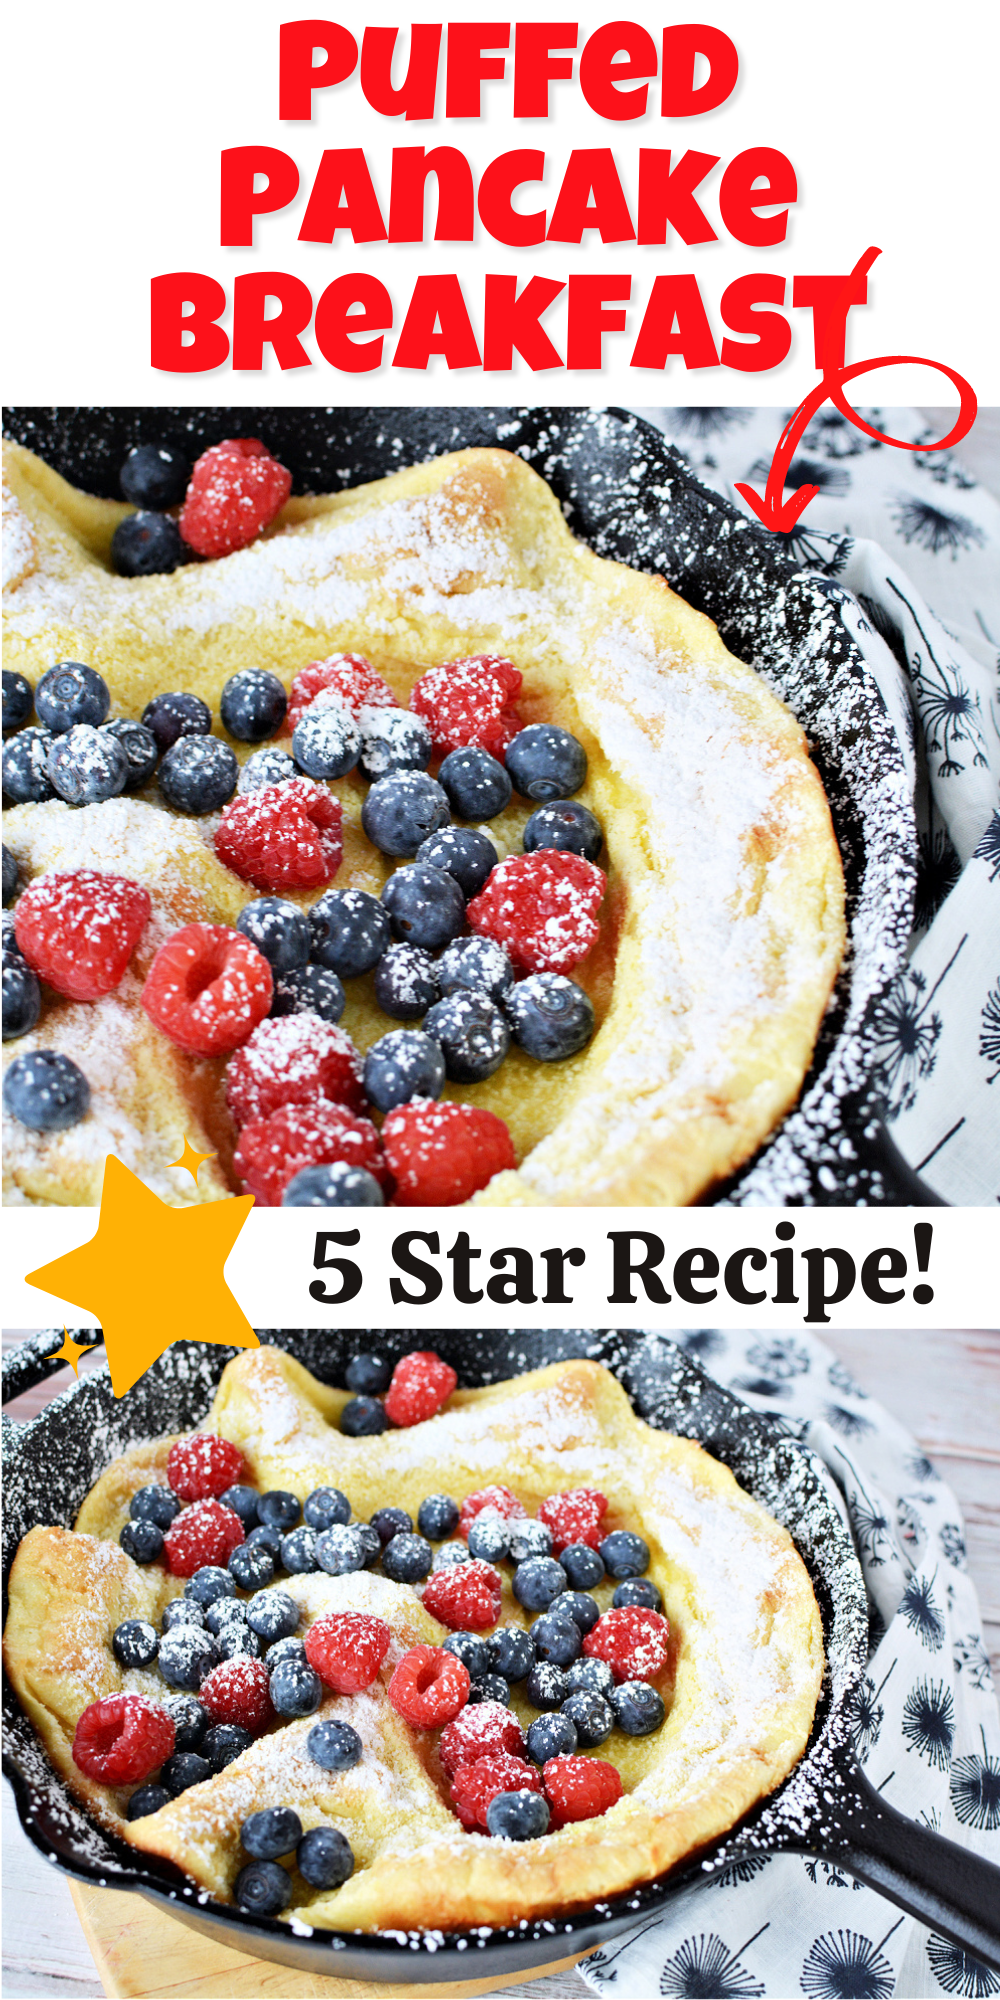 Puffed pancake filled with fresh berries and sprinkled with powdered sugar